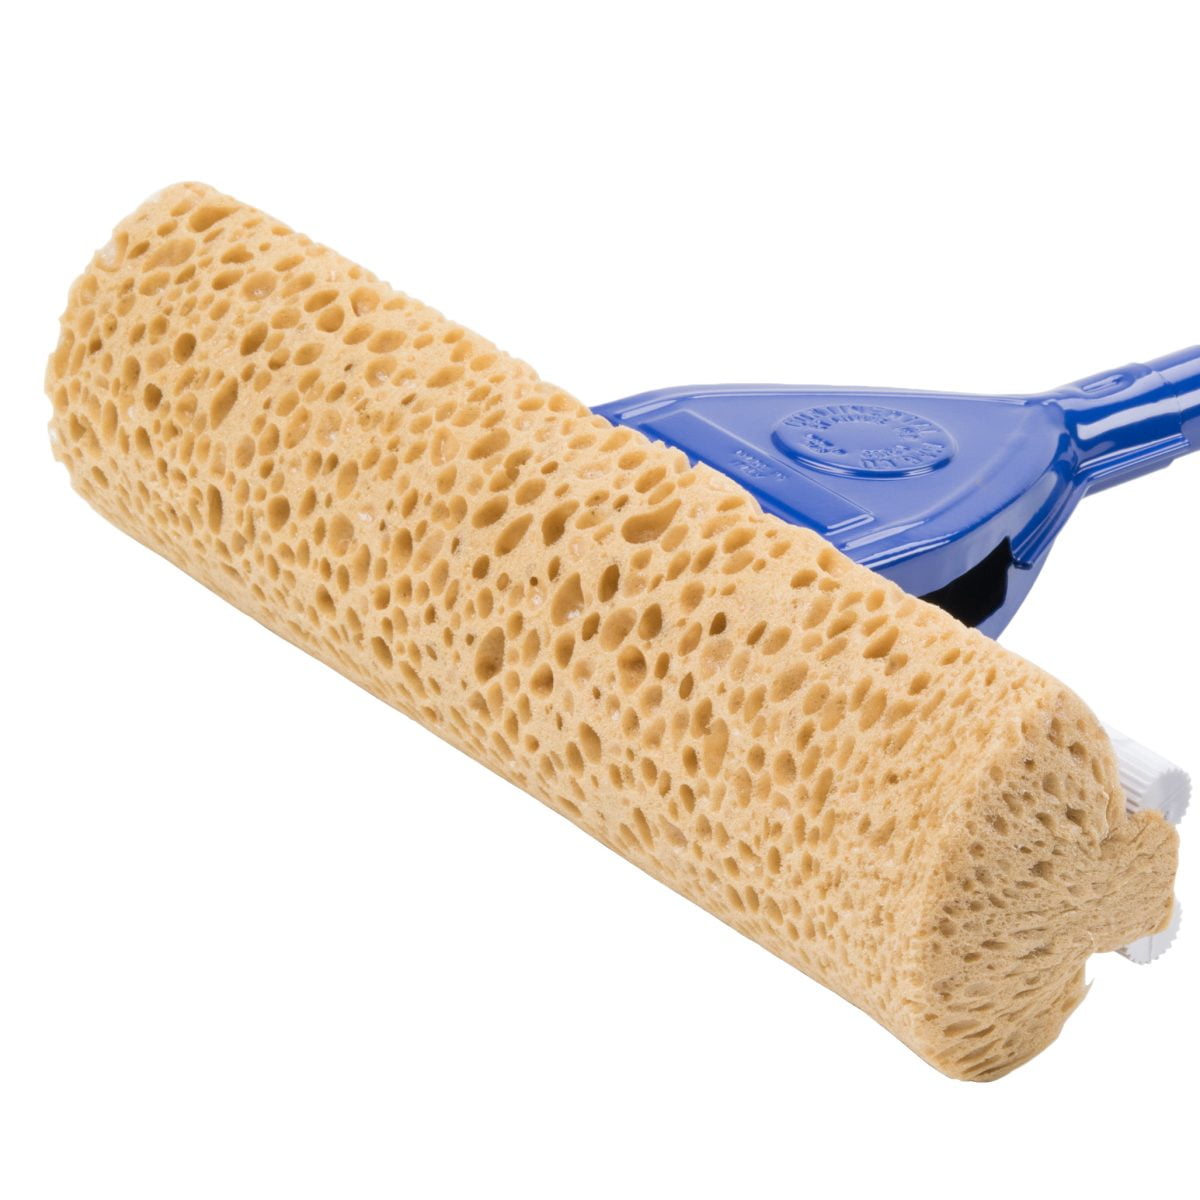 Integrity Cellulose Sponge Mop with Handle